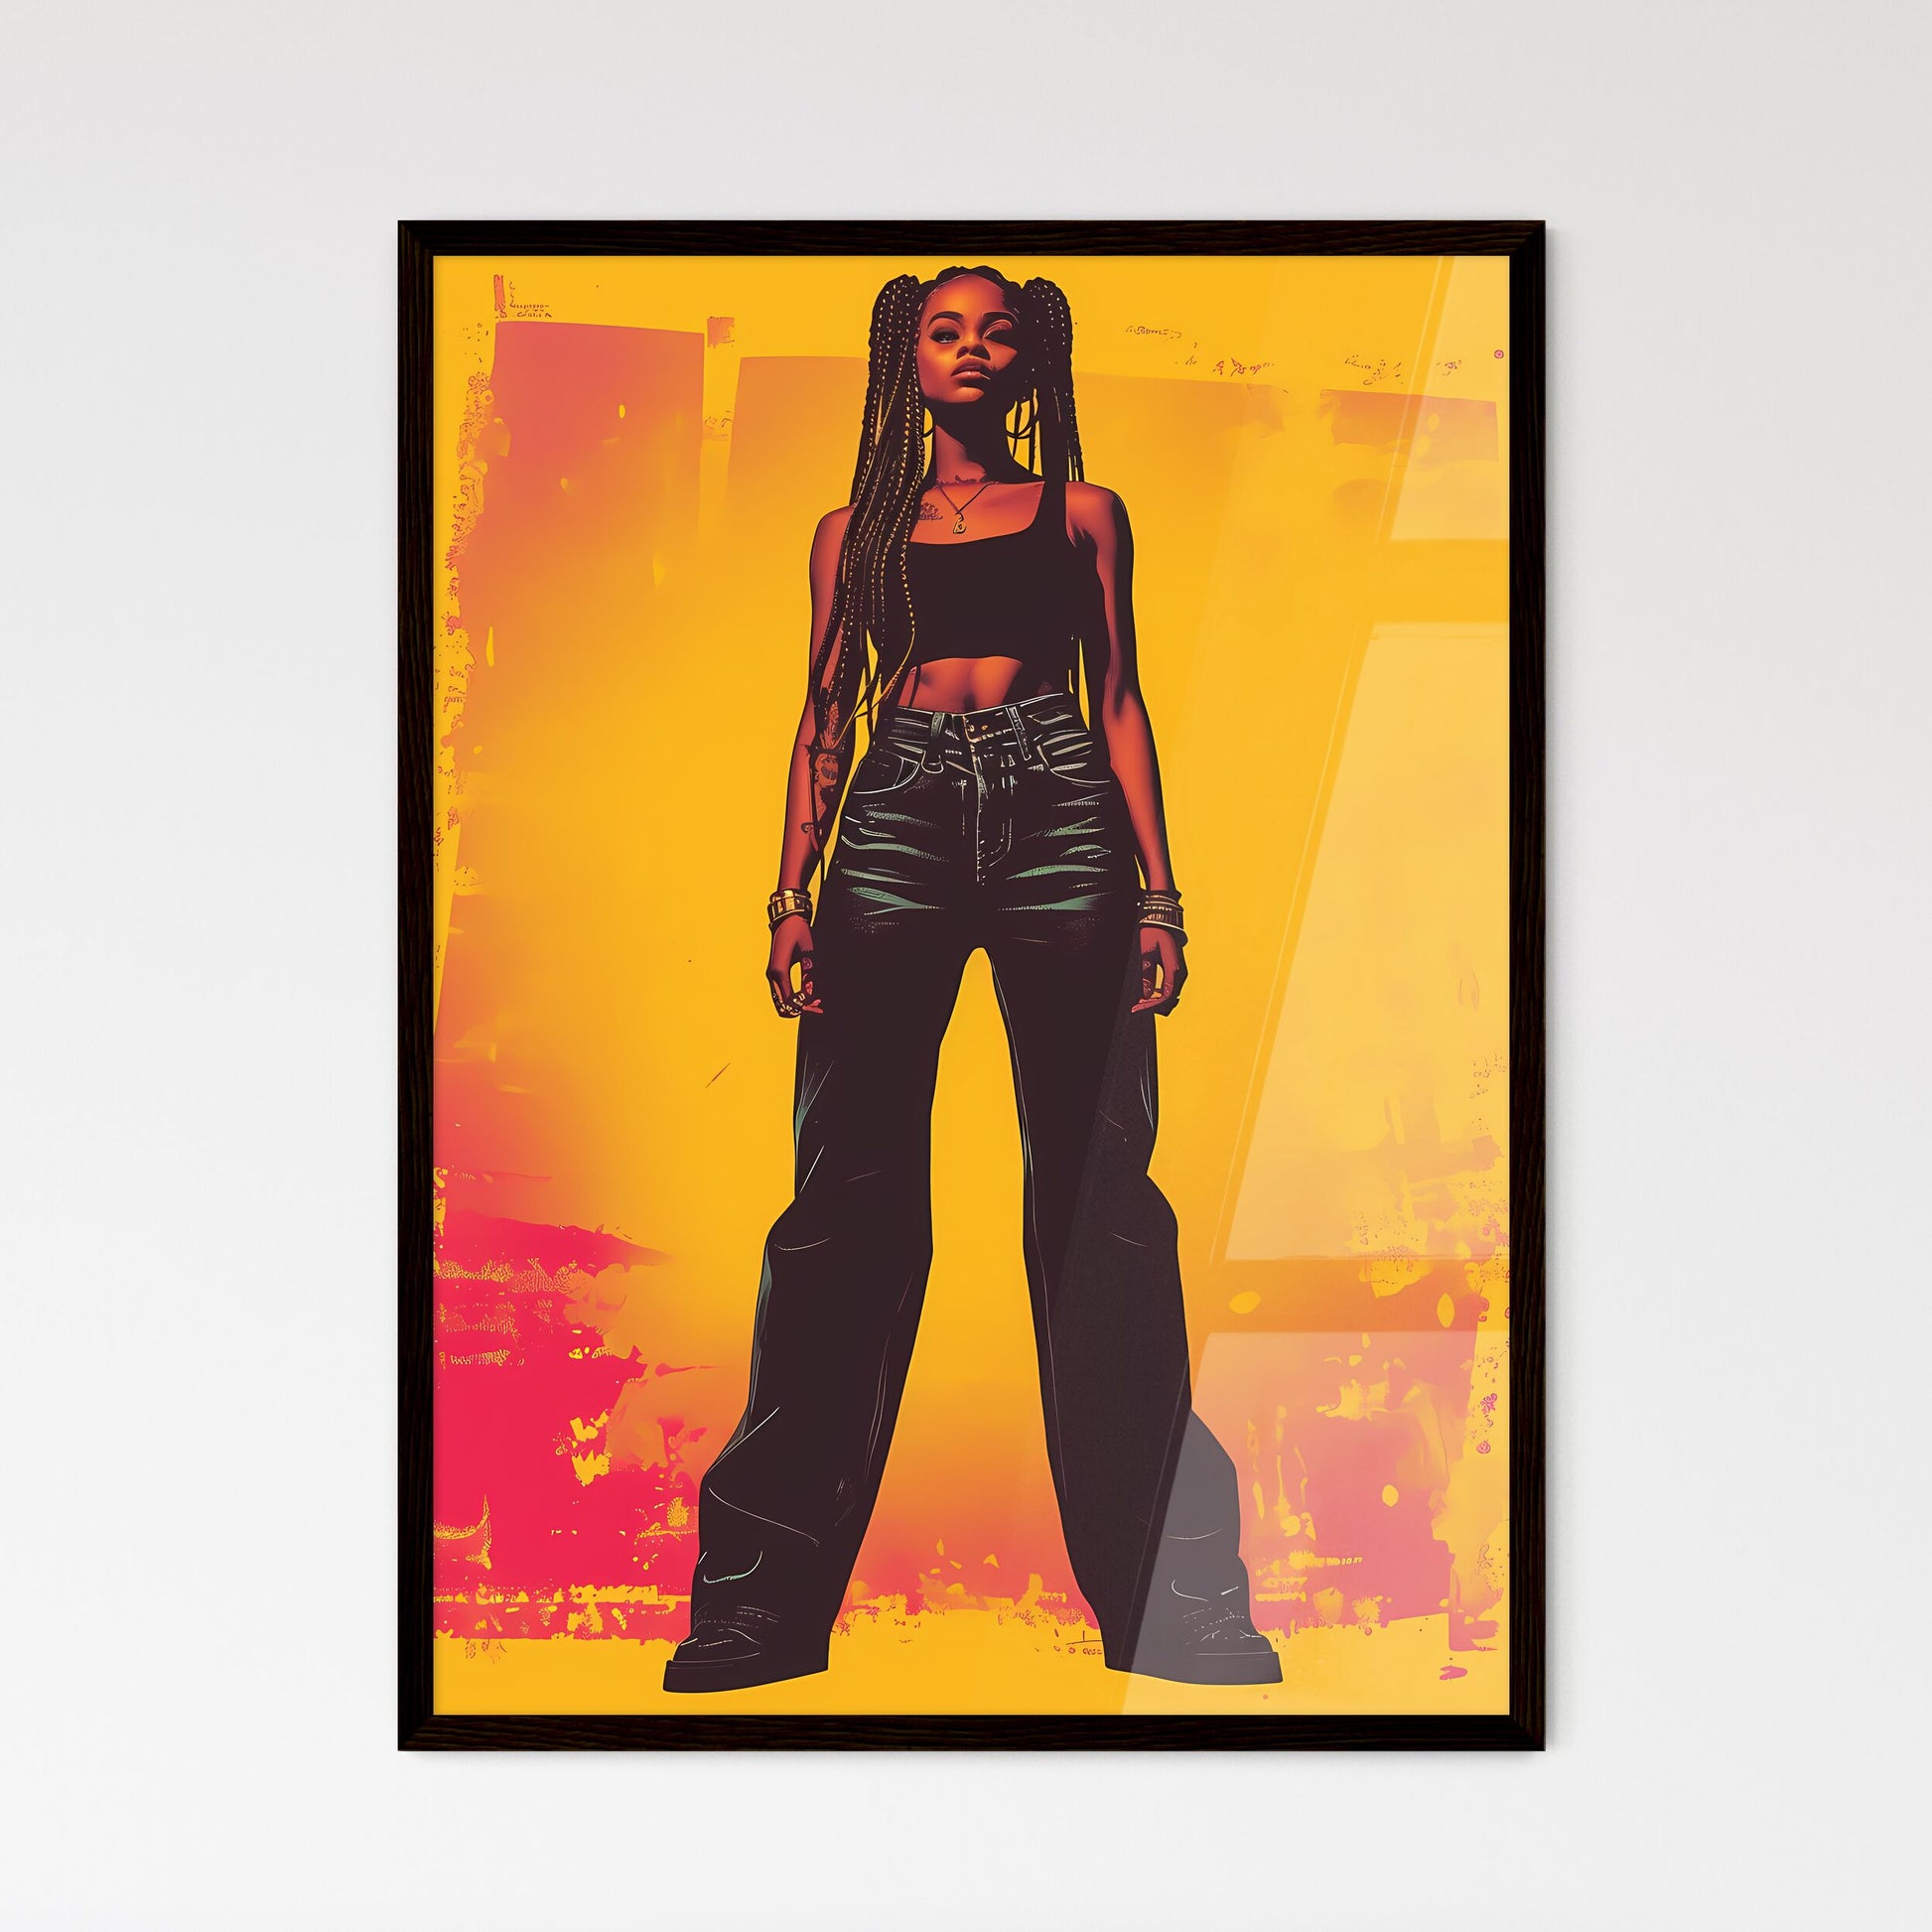 A standing woman, listining a music illustrations vector design - Art print of a woman with long braids wearing black pants and a tank top Default Title